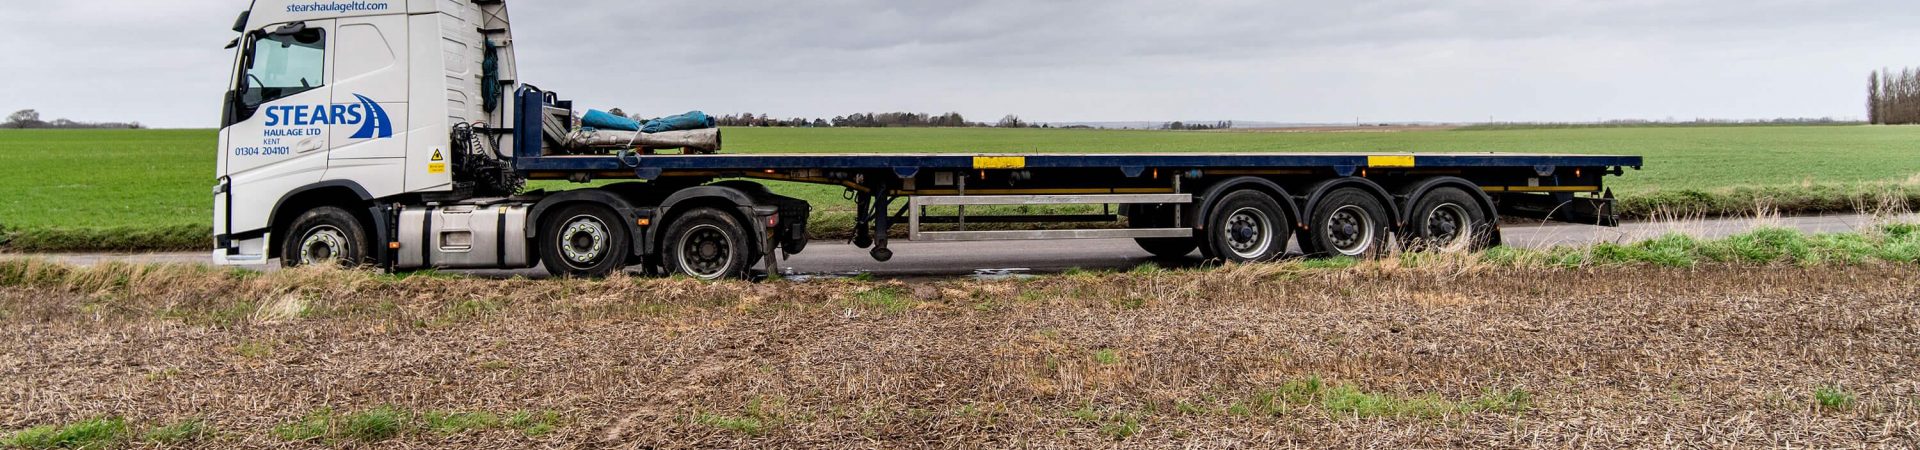 FLATBED SPECIALISTS SERVING THE UK AND BEYOND